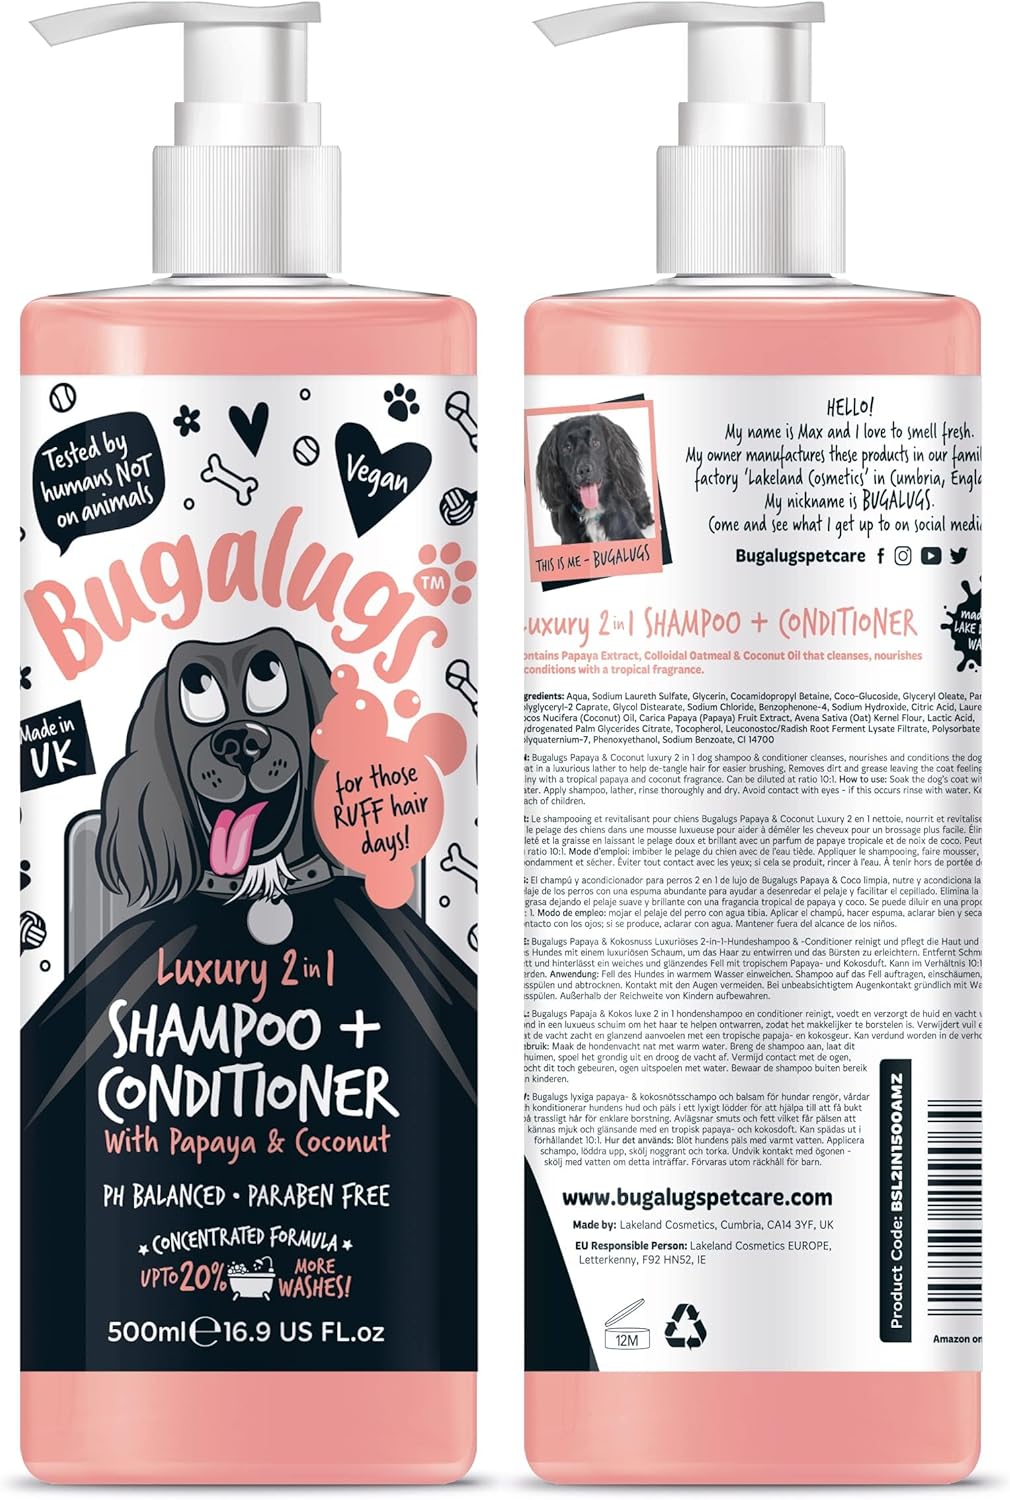 Dog Shampoo Luxury 2 in 1 Papaya & Coconut Dog Grooming Shampoo Products for Smelly Dogs with Fragrance, Best Puppy Shampoo, Professional Groom Vegan pet Shampoo & Conditioner